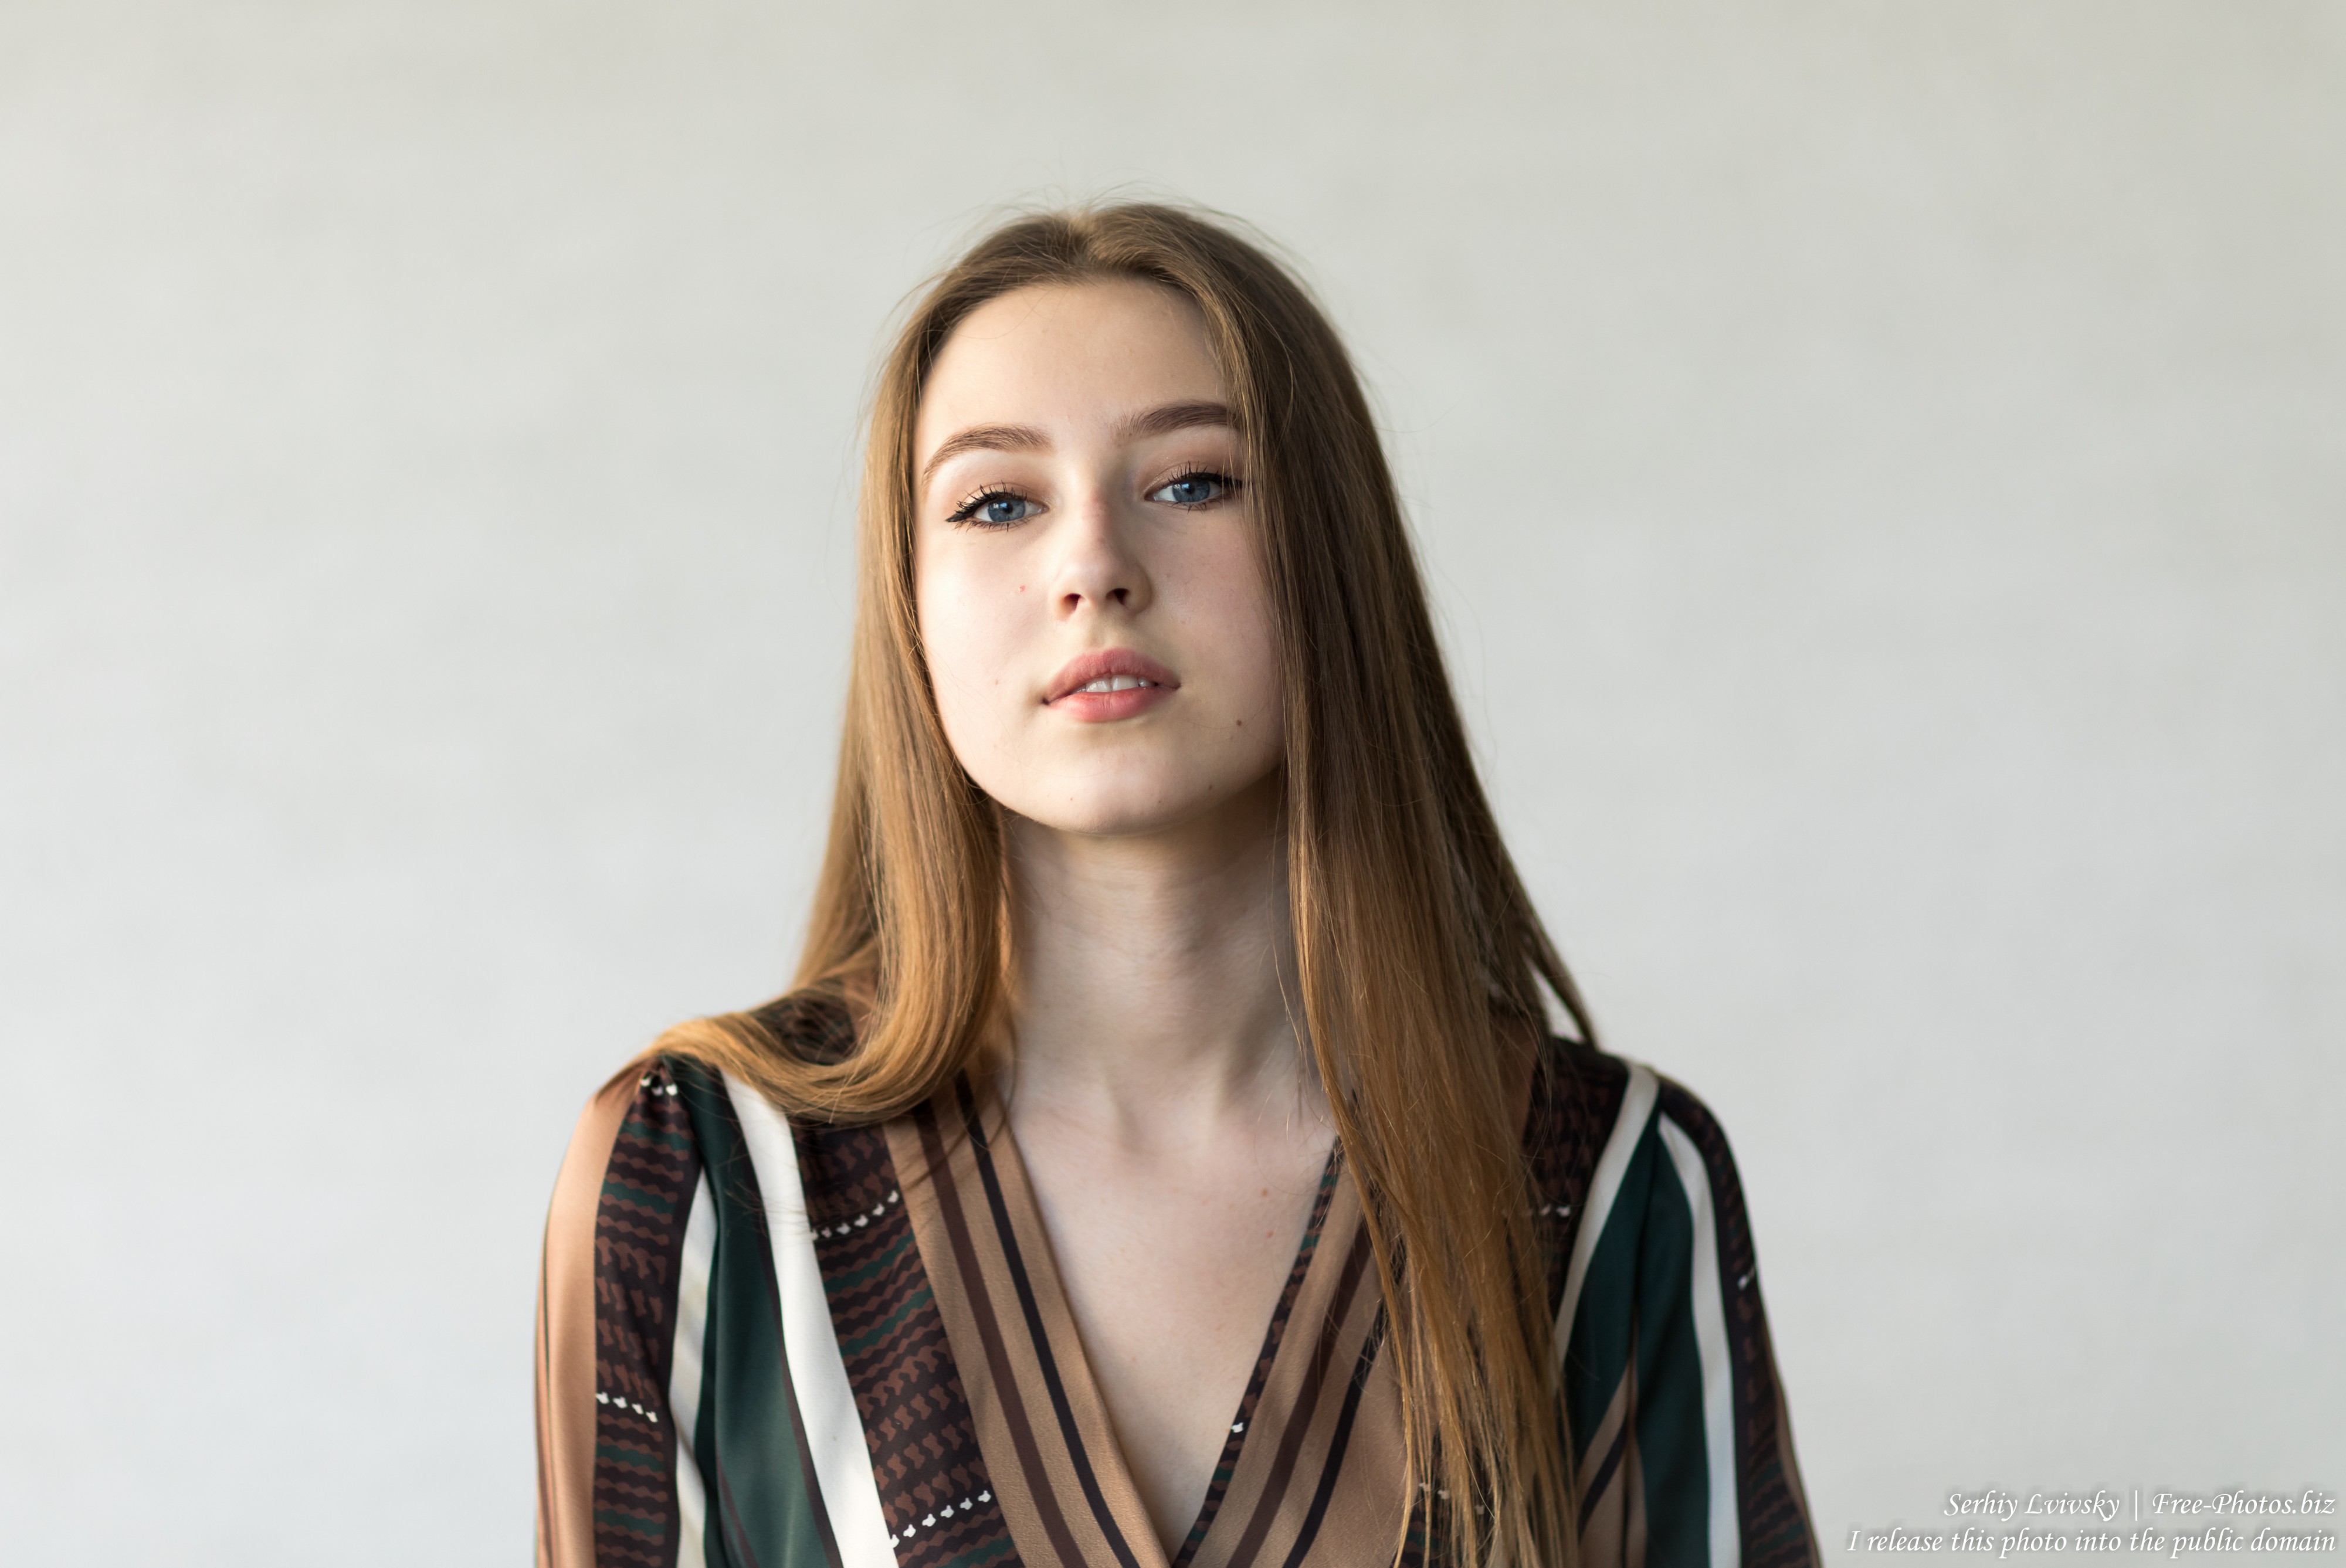 Vika - a 17-year-old girl with blue eyes and natural fair hair photographed in June 2019 by Serhiy Lvivsky, picture 1